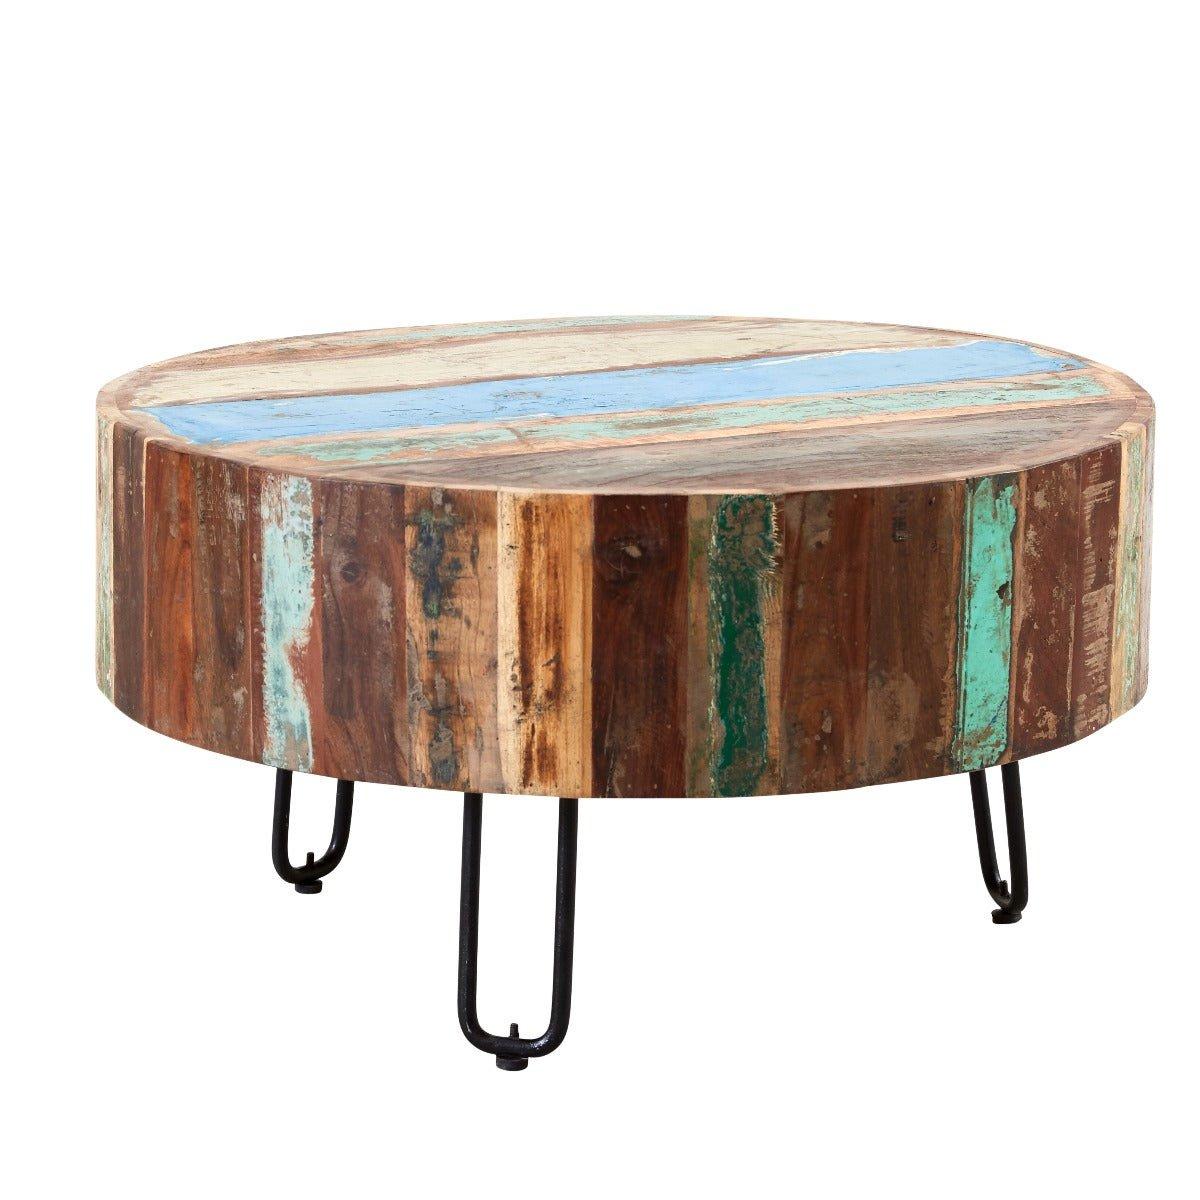 Ted Reclaimed Boat Drum Coffee Table